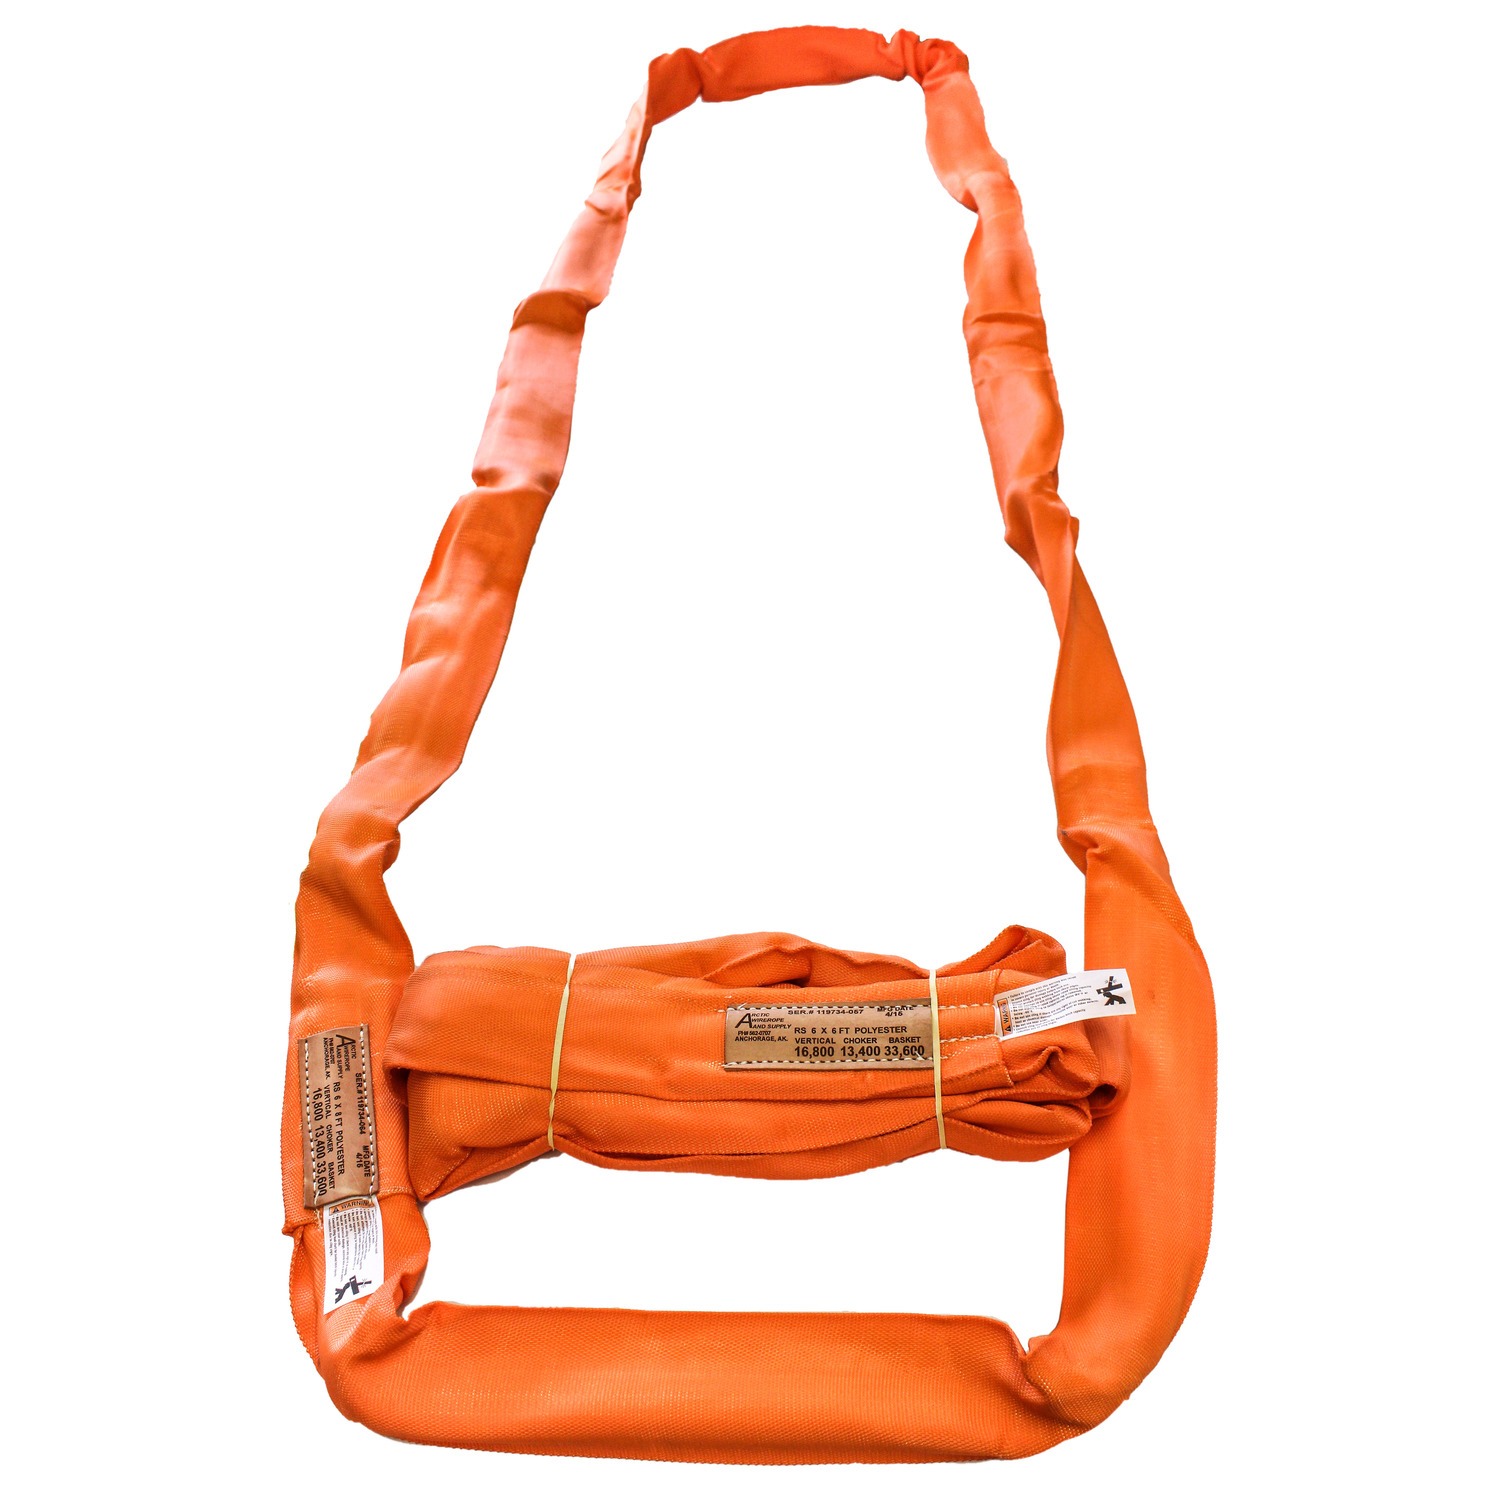 Lifting Slings, Product Categories